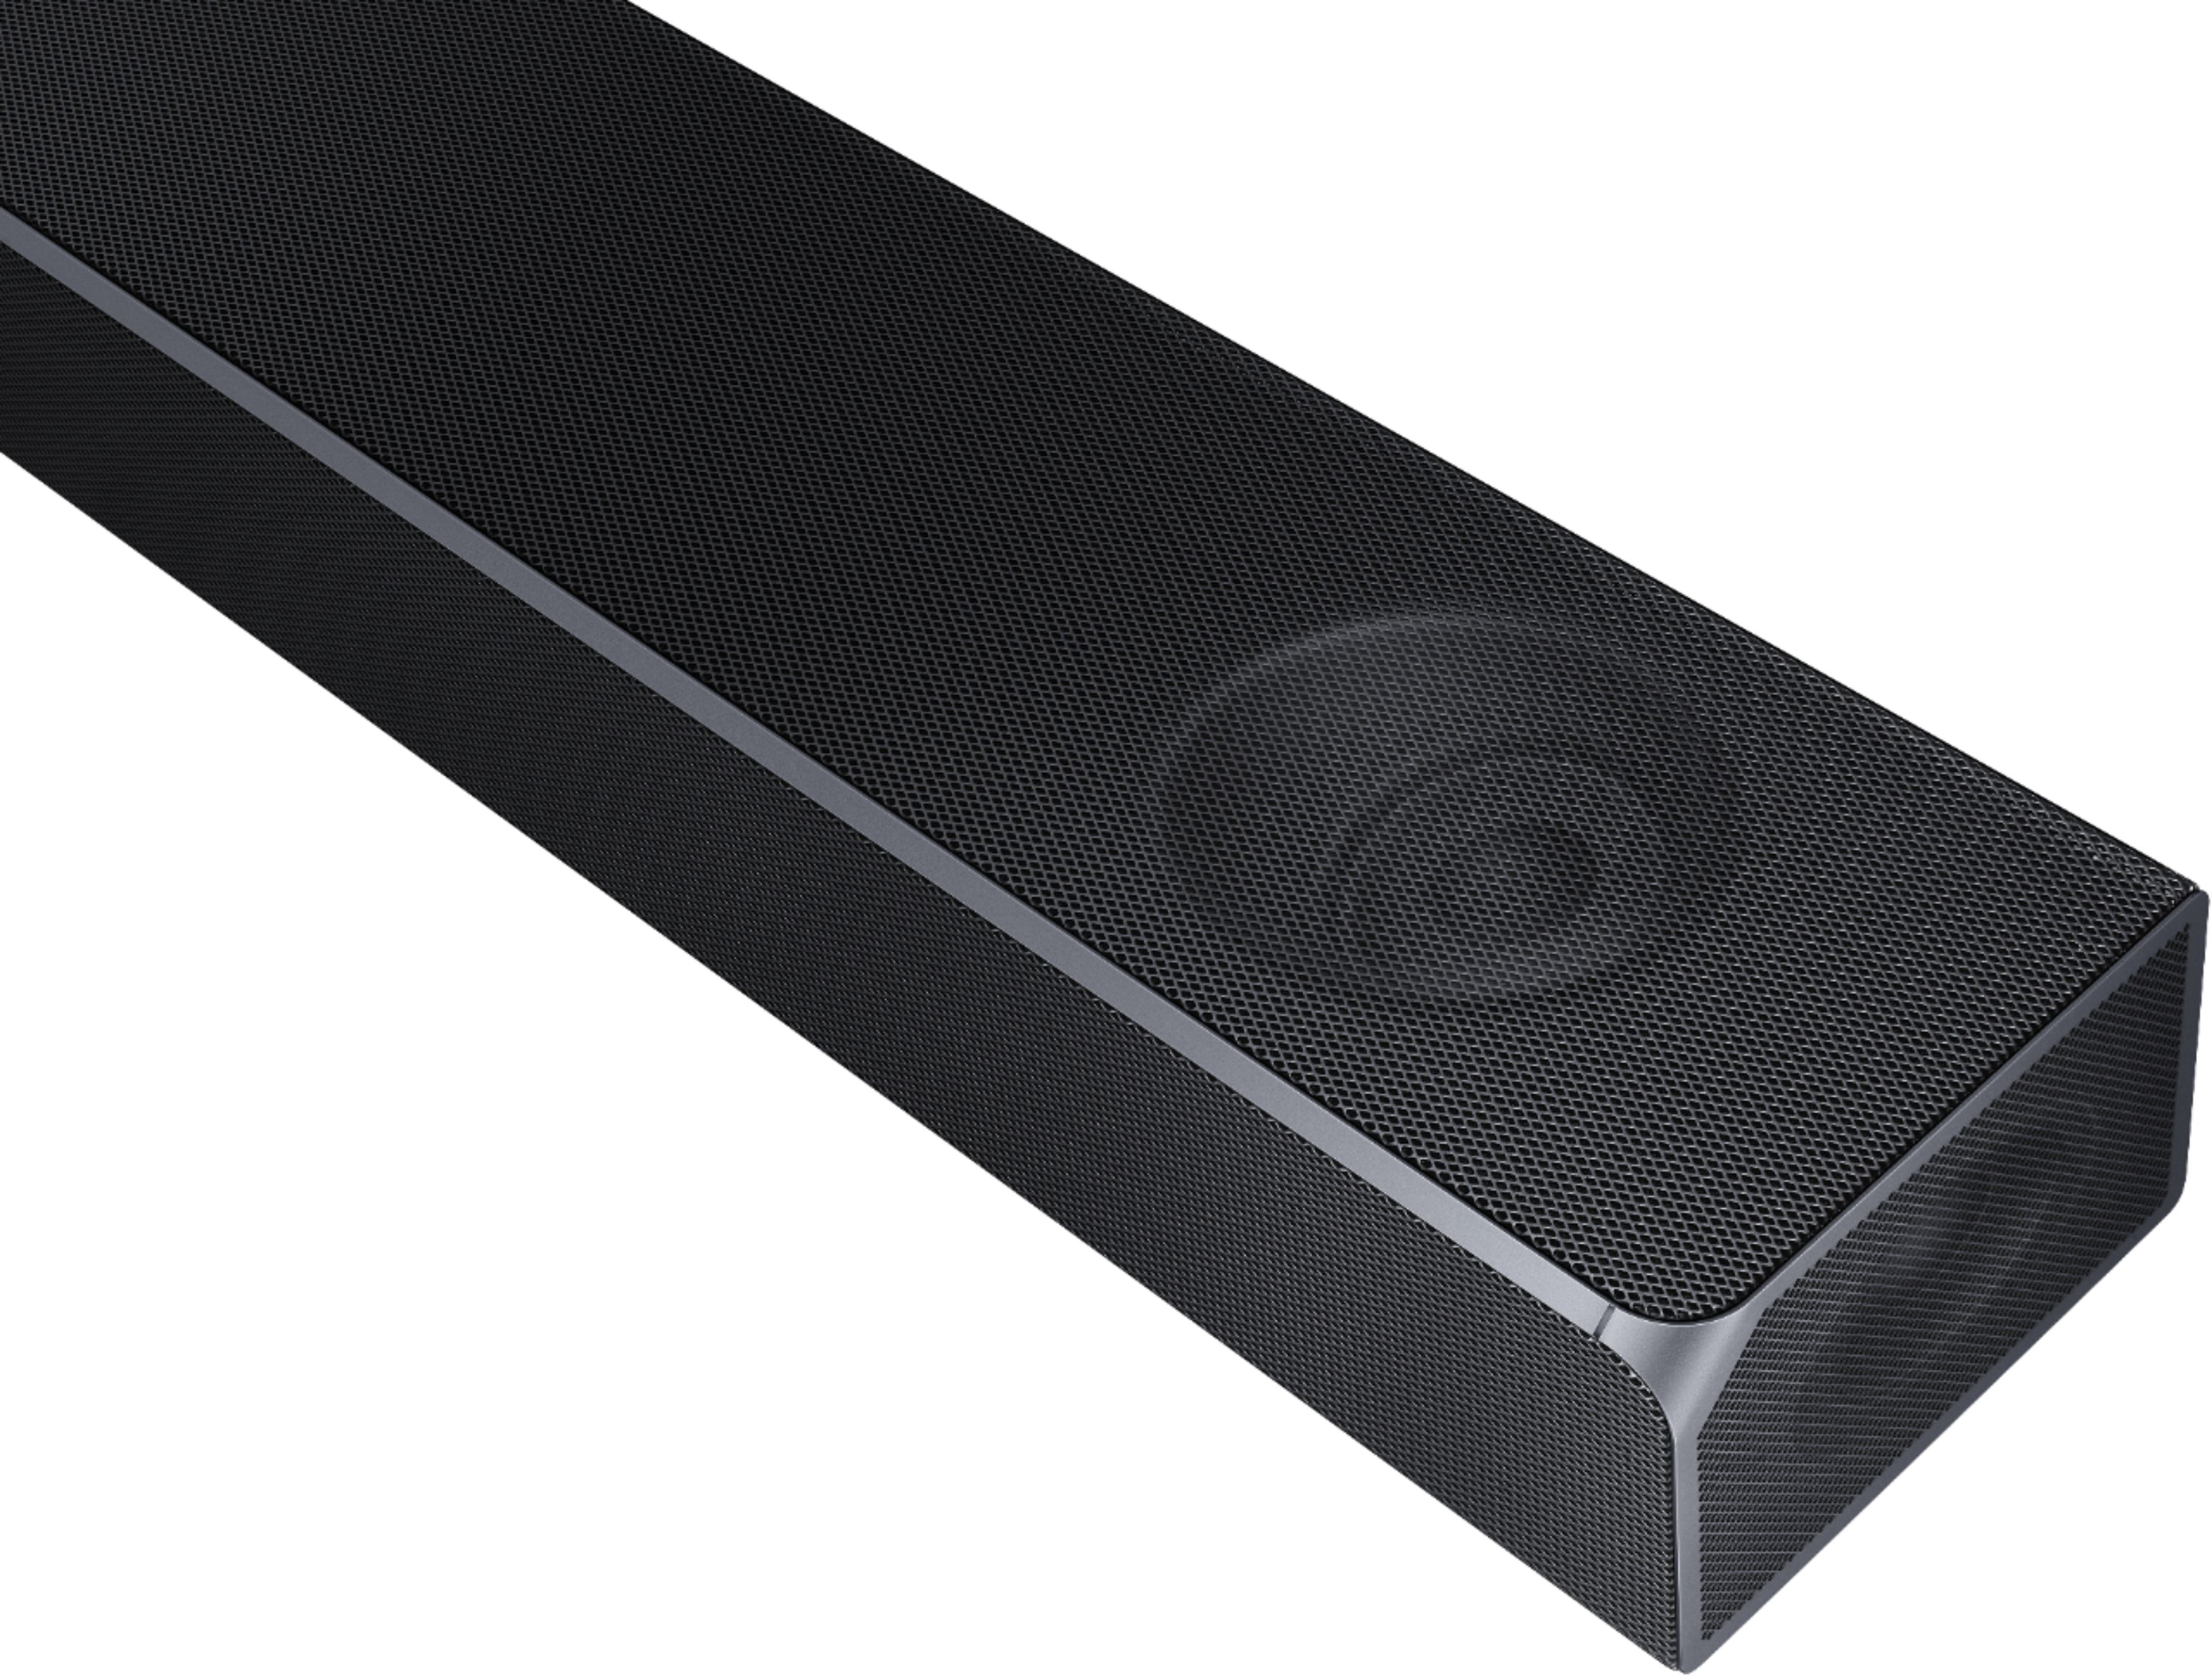 Game Mode Bluetooth Compatible 4K Pass-Through with HDR 512-Watts Samsung Harman Kardon 7.1.4 Dolby Atmos Soundbar HW-Q90R with Wireless Subwoofer and Rear Speaker Kit Adaptive Sound 